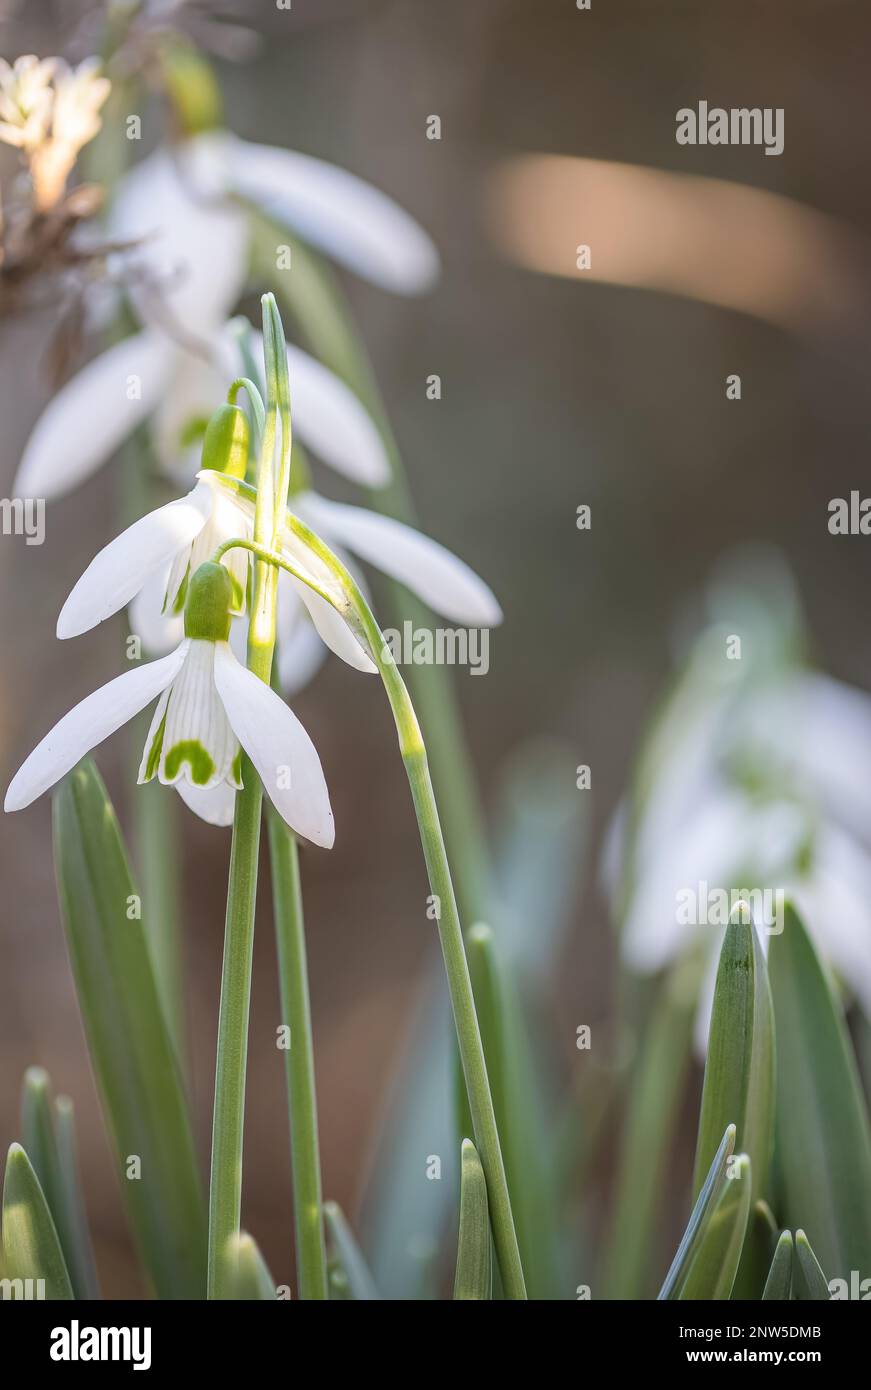 A group of snowdrops (Galanthus) in full bloom in front of a blurry background Stock Photo